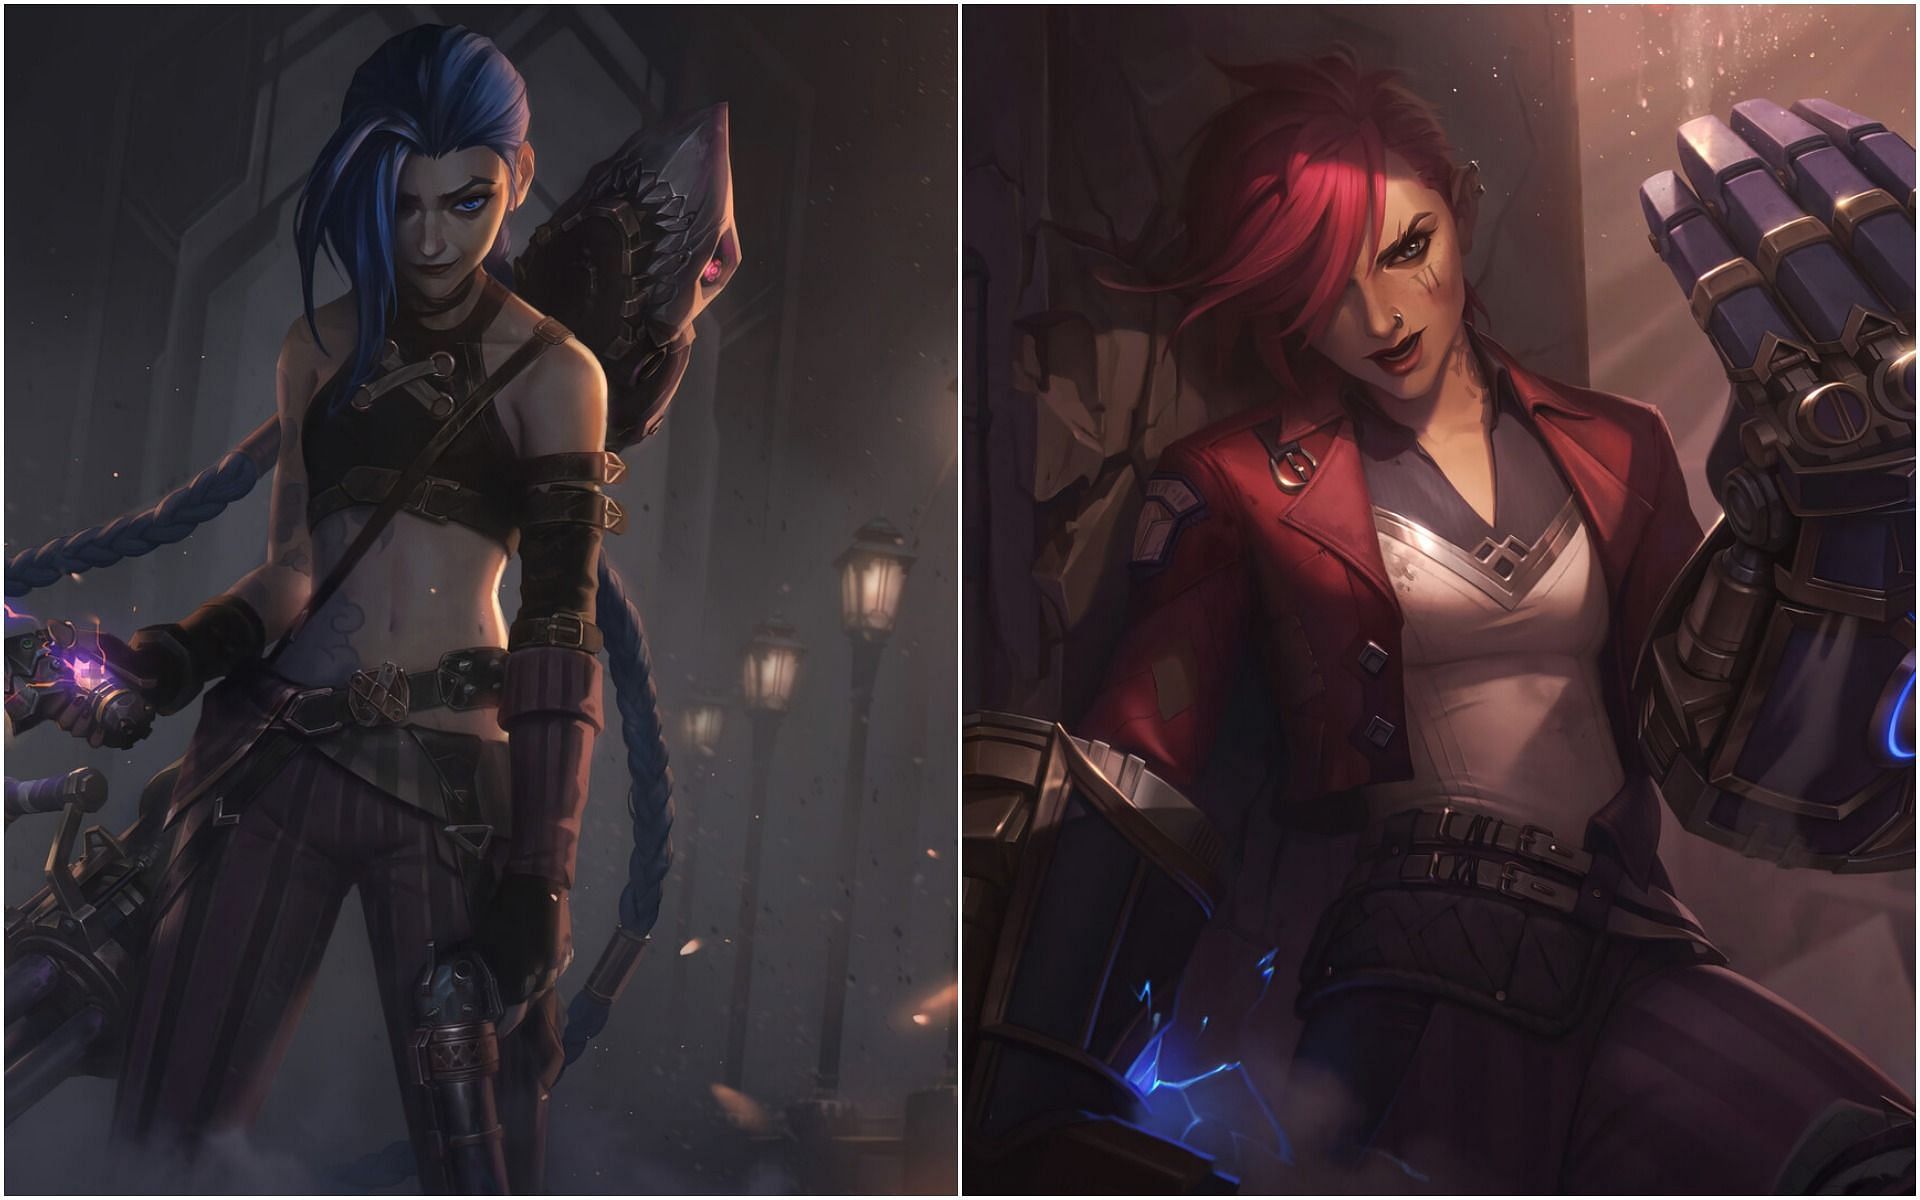 Players can obtain free Arcane themed skins all across November for Jinx, Vi, Caitlyn, and Jayce (Image via League of Legends)